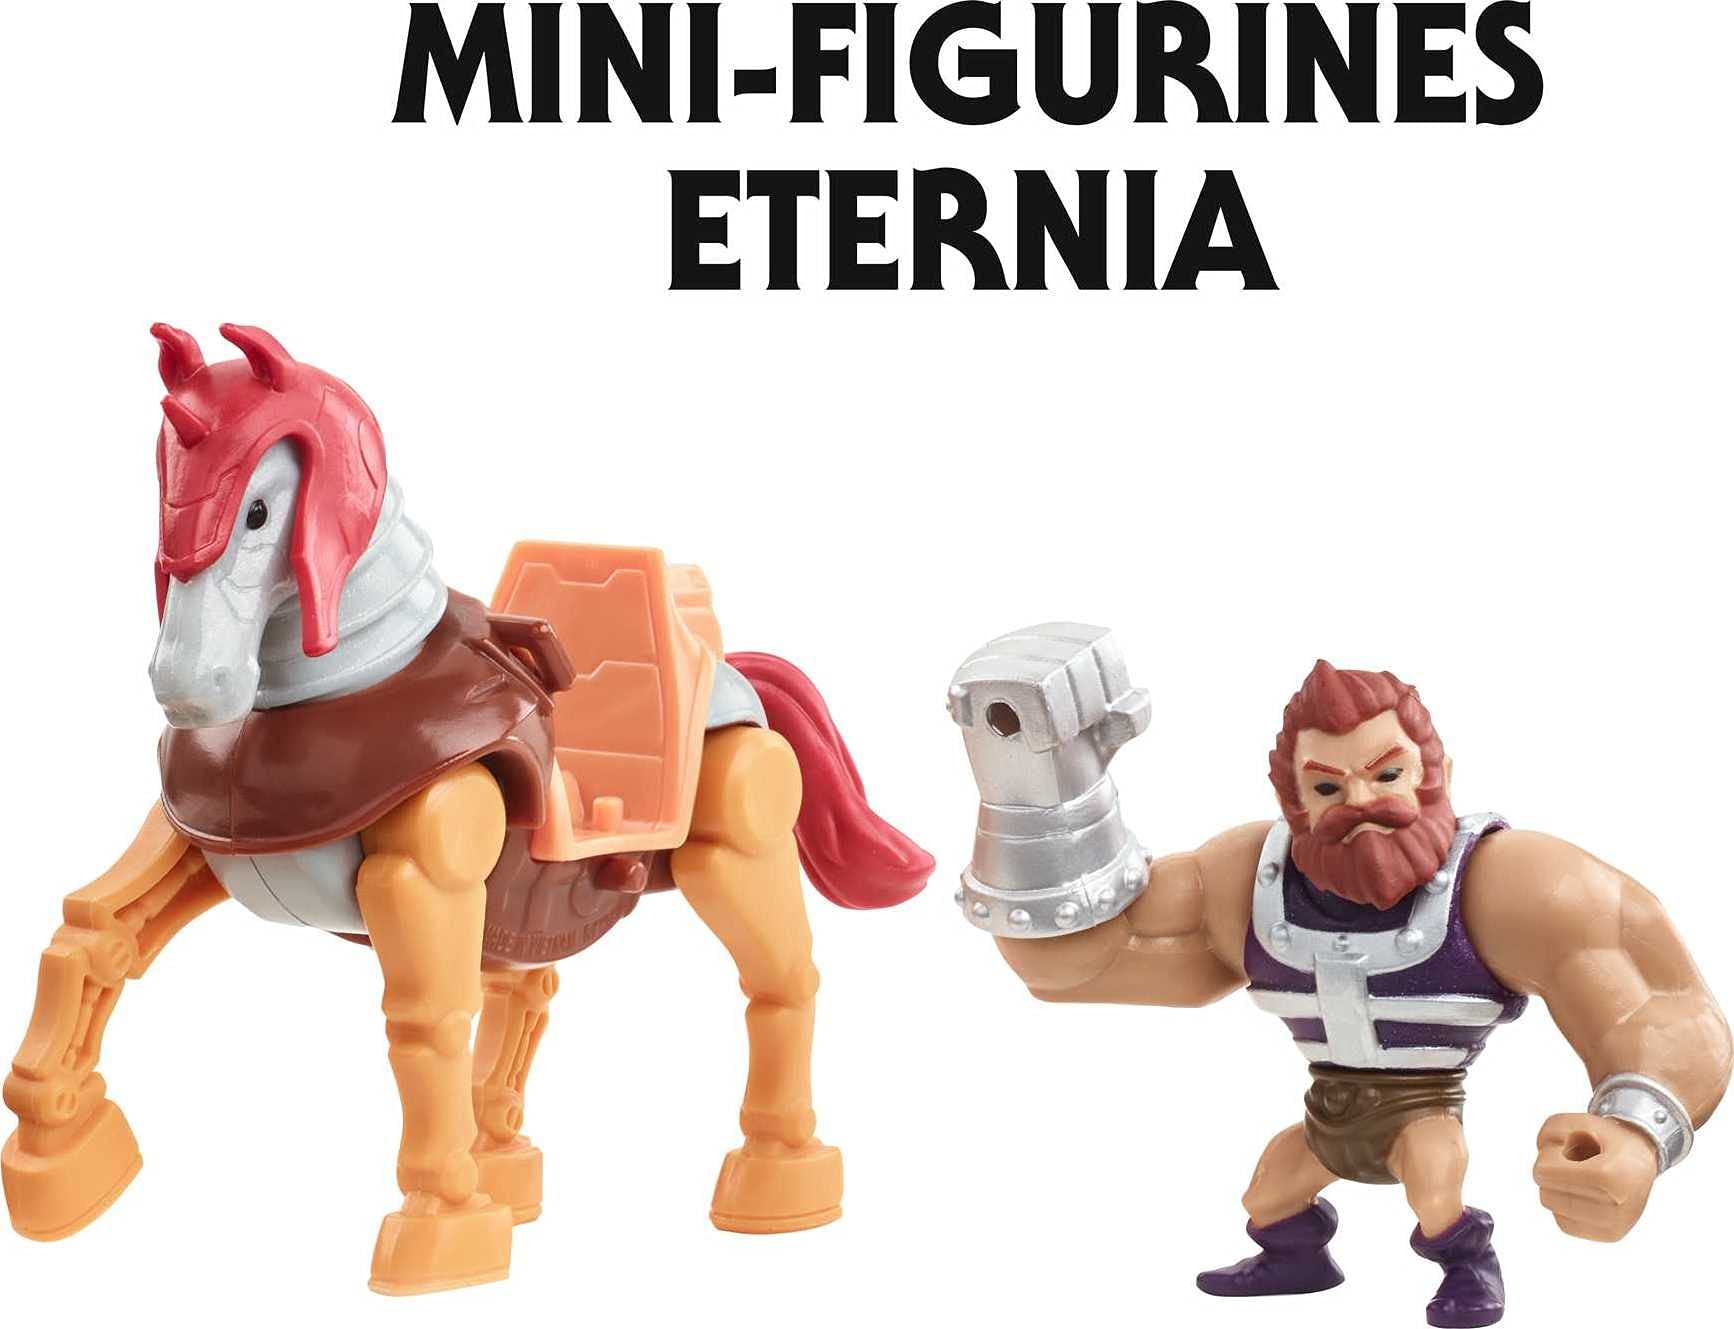 Masters of the Universe: Revelation! Minis Vehicle or Creature & Eternia Mini Figure, 2-in Character for Storytelling Play and Display, Gift for Motu Fans Ages 6 Years and Older